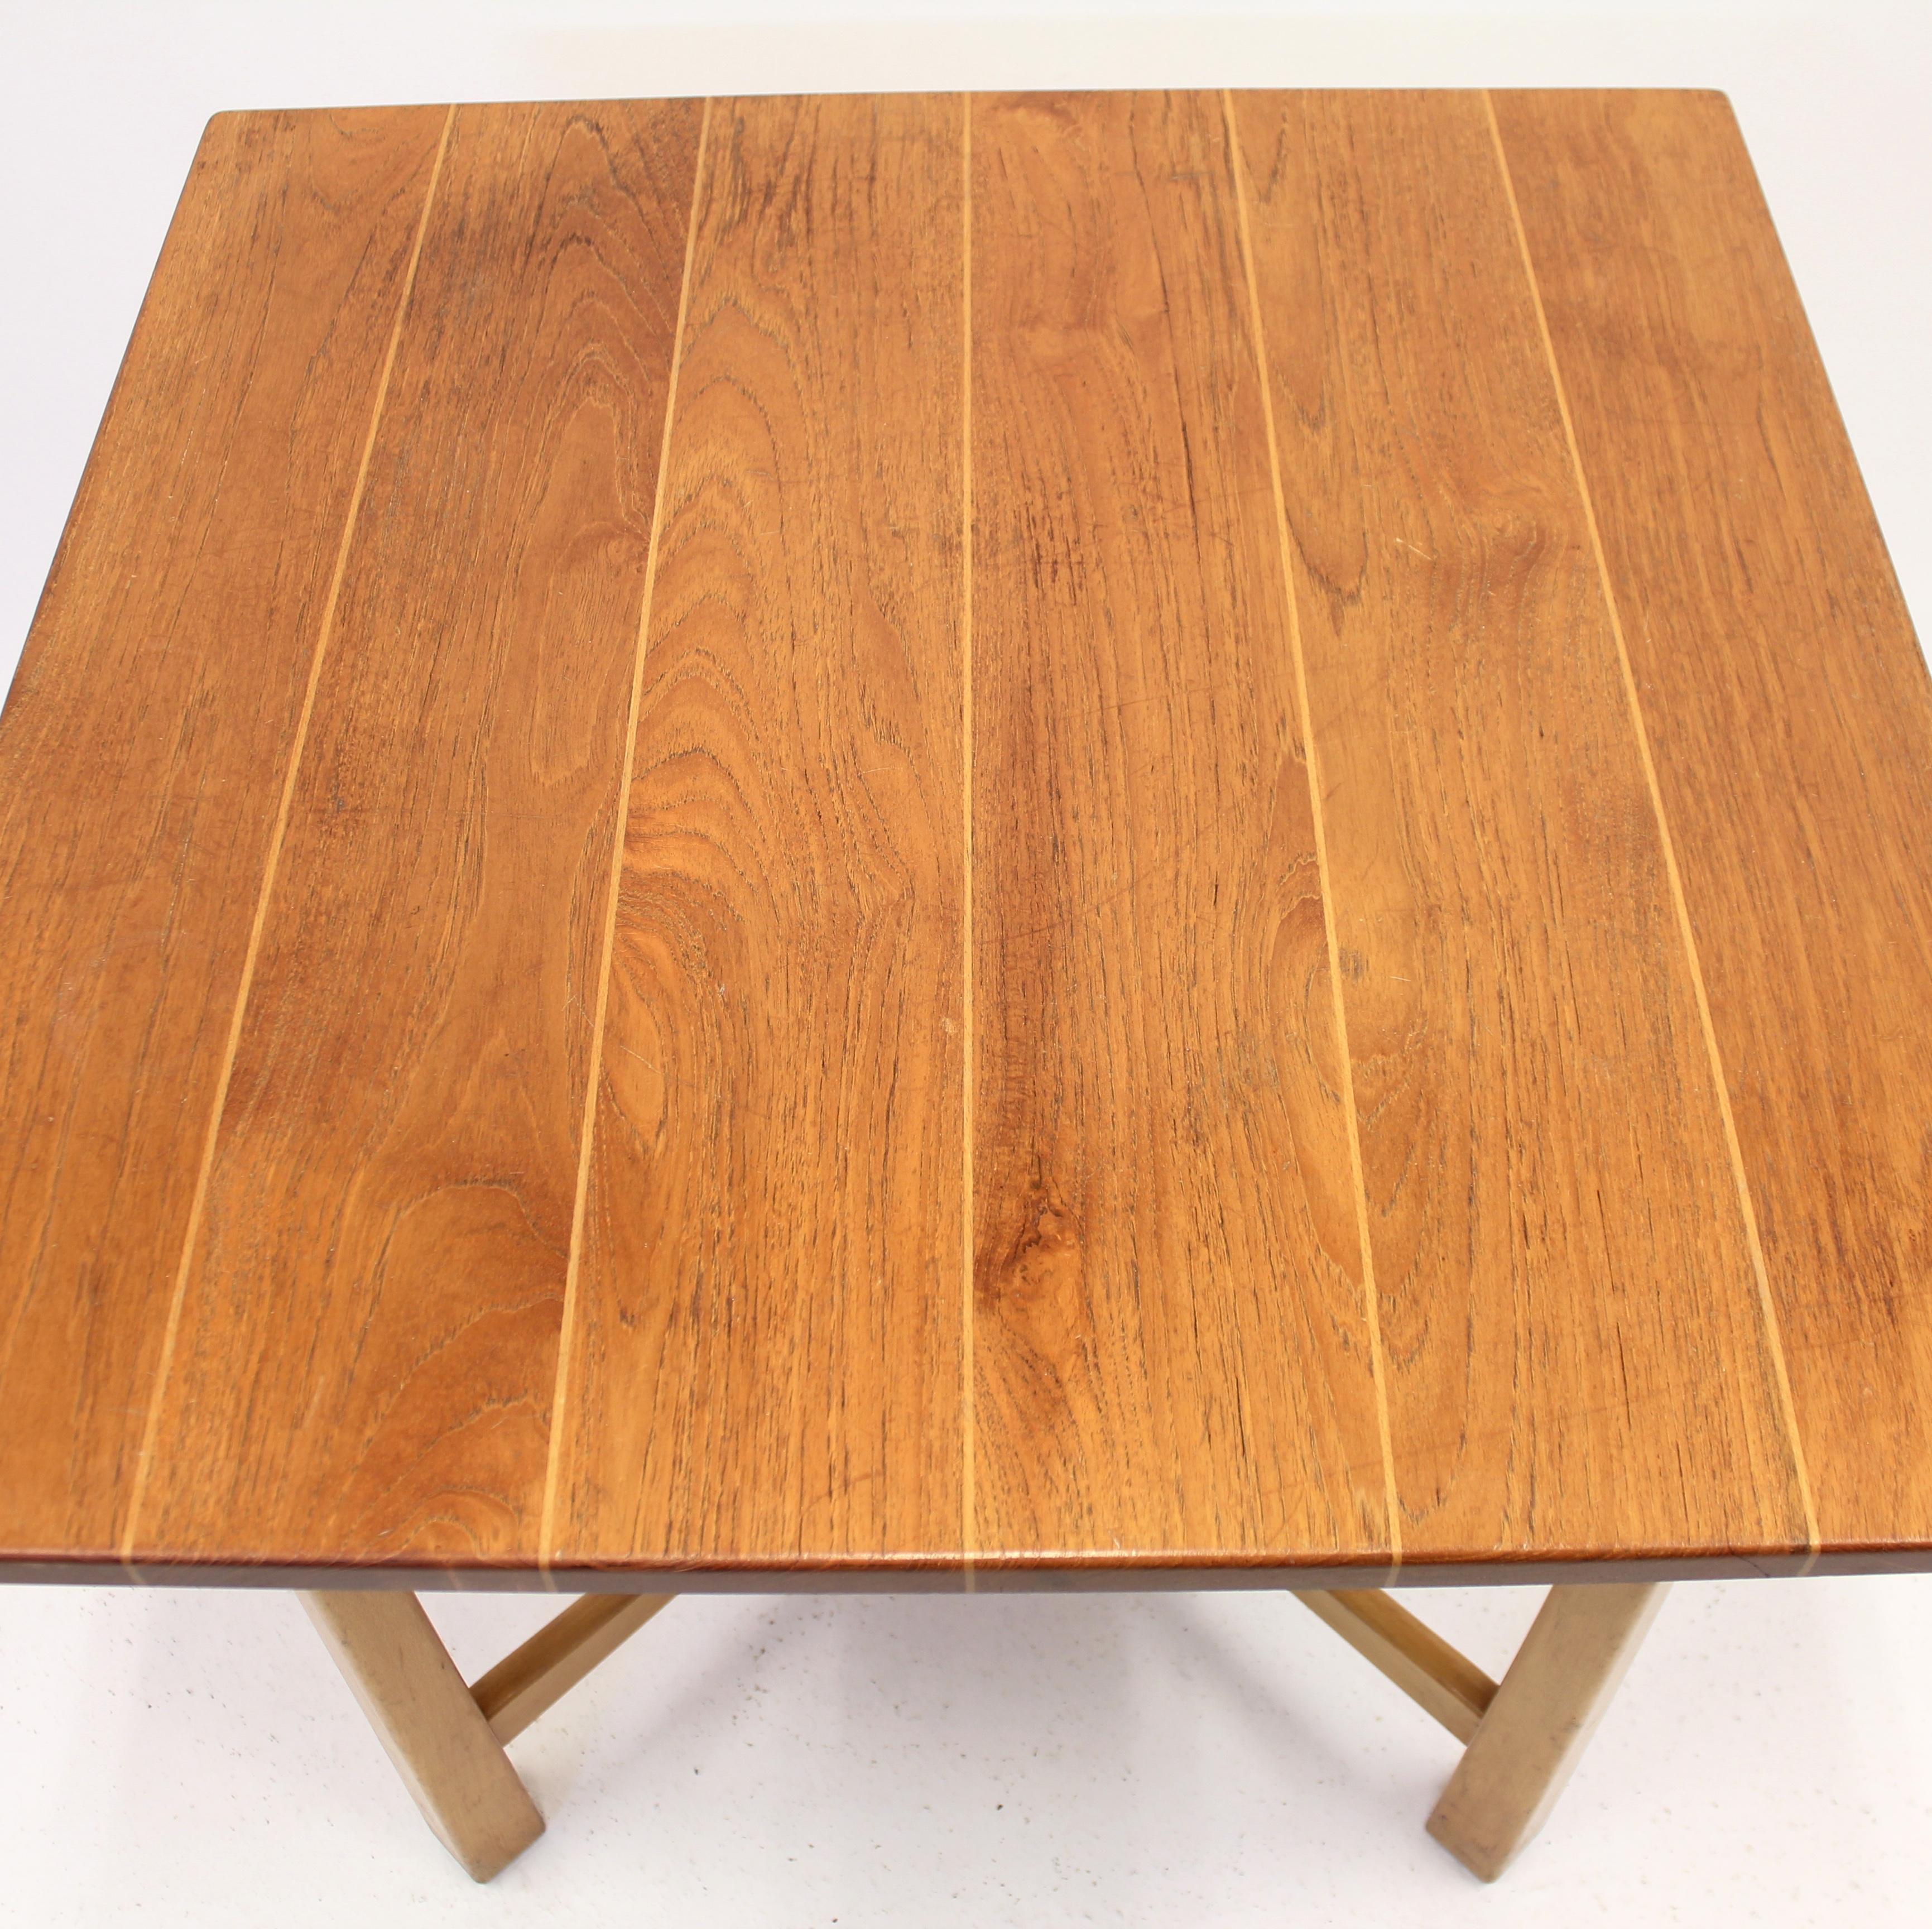 Swedish Modern Teak and Birch Table, Mid-20th Century For Sale 3